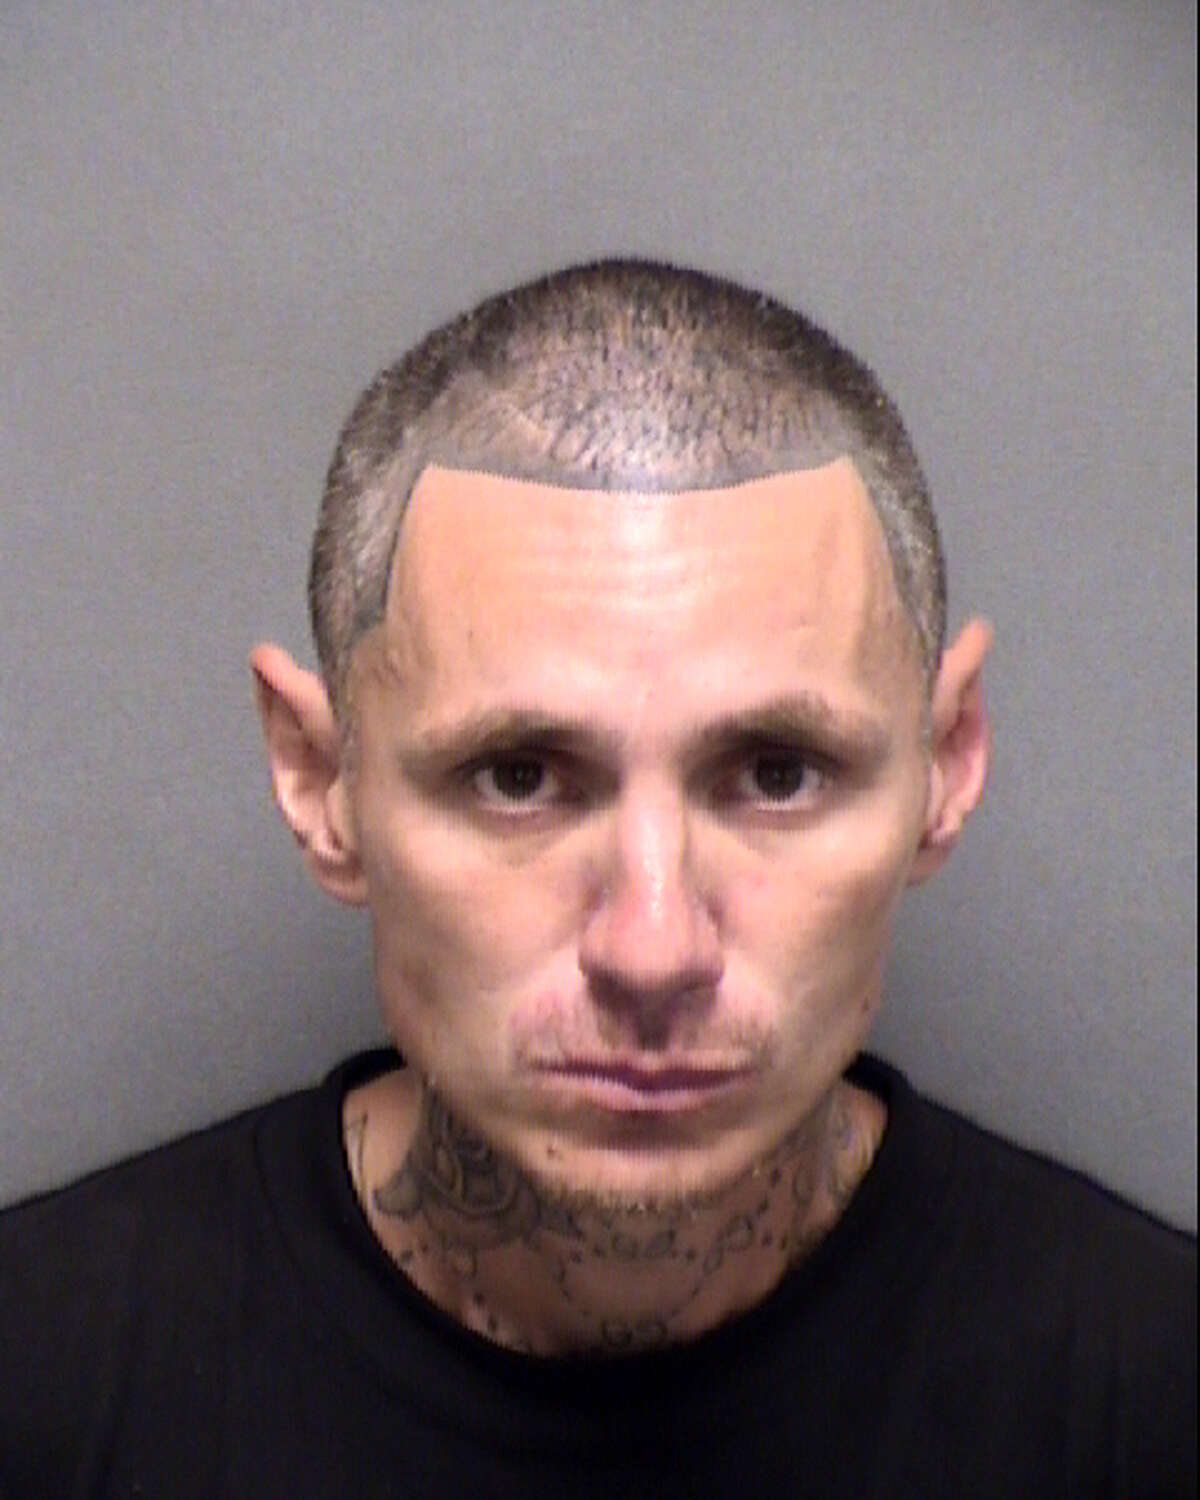 Apolinar Medina, 37,  was arrested after stealing a pair of autographed Tim Duncan sneakers from a North Side store, an arrest affidavit said.